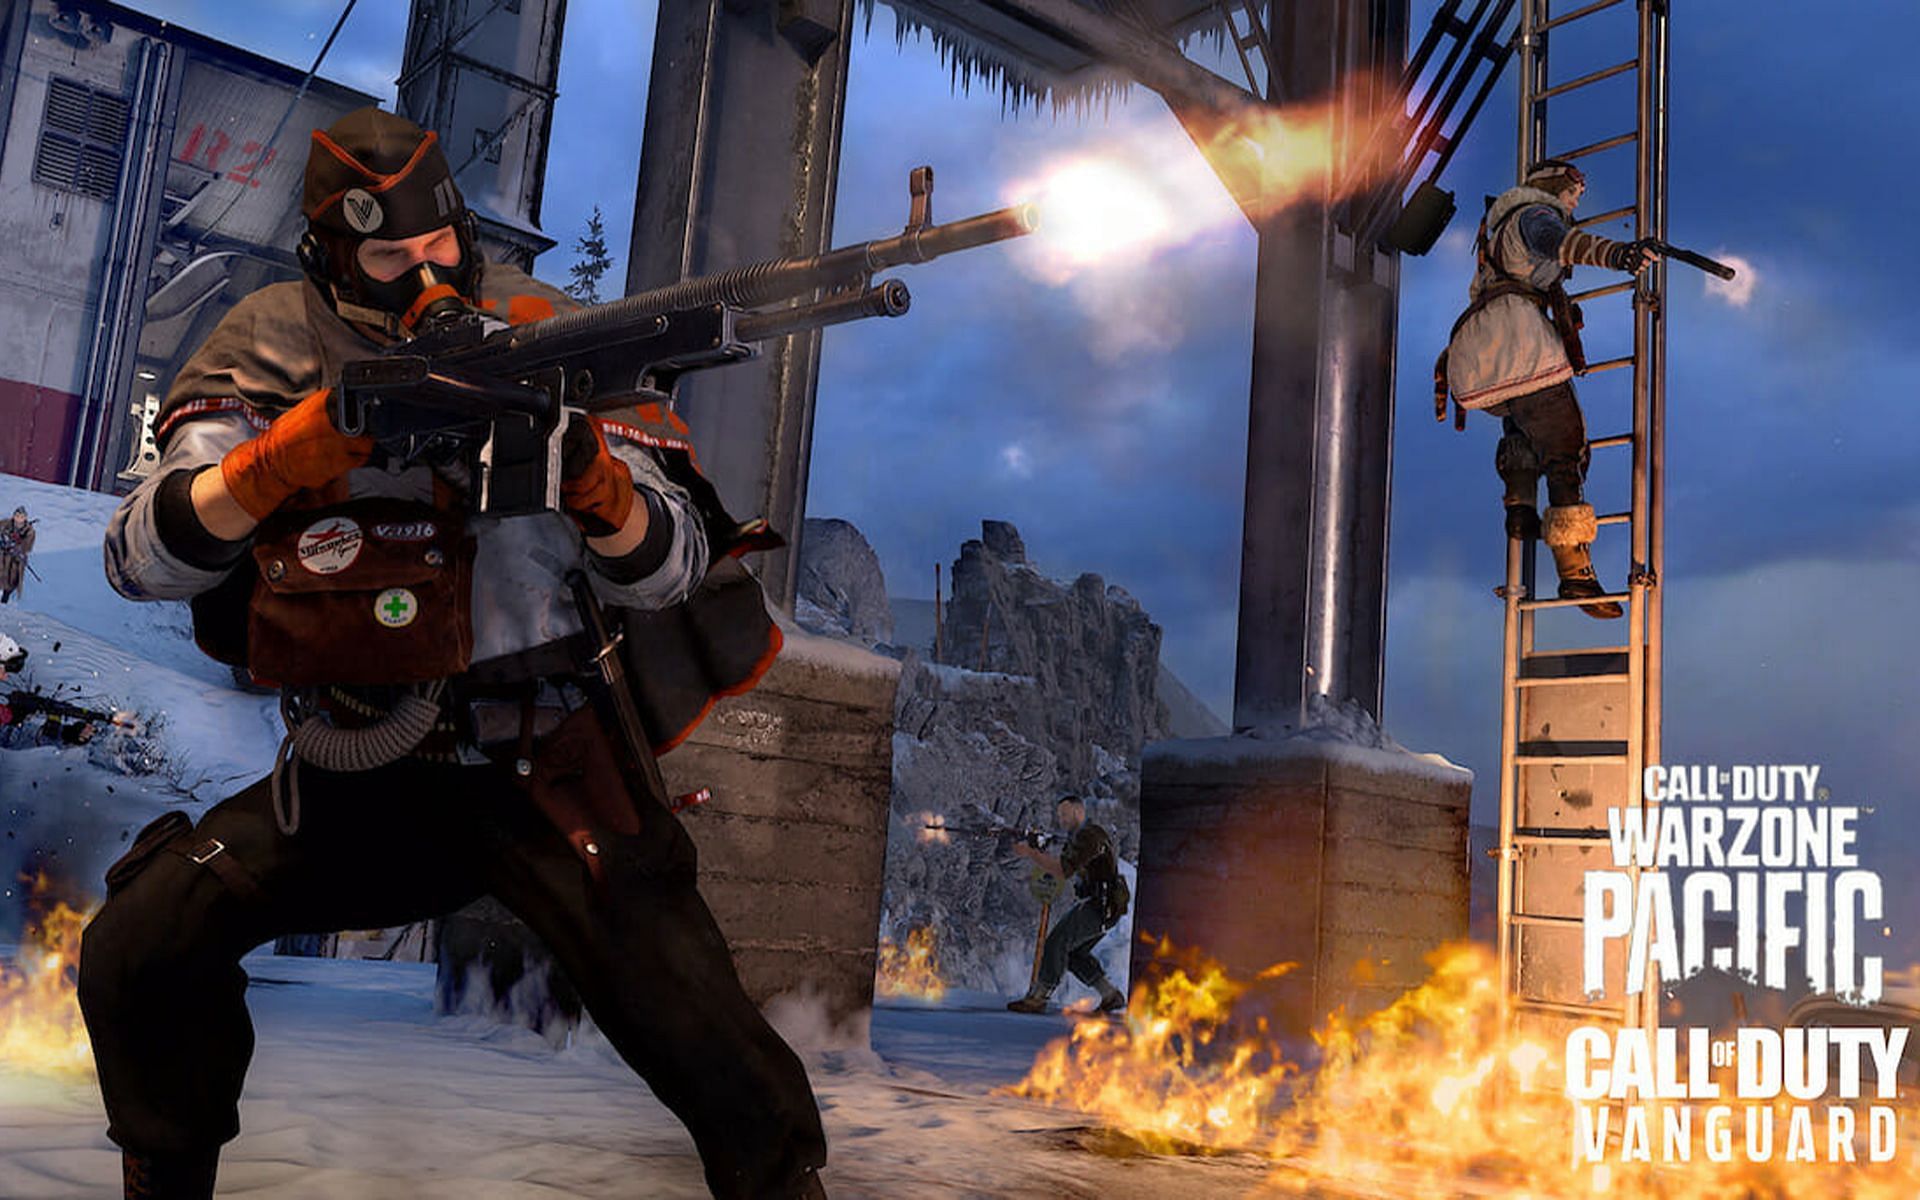 Call of Duty: Warzone Pacific Season Two is now out for players to enjoy (Image via Activision)